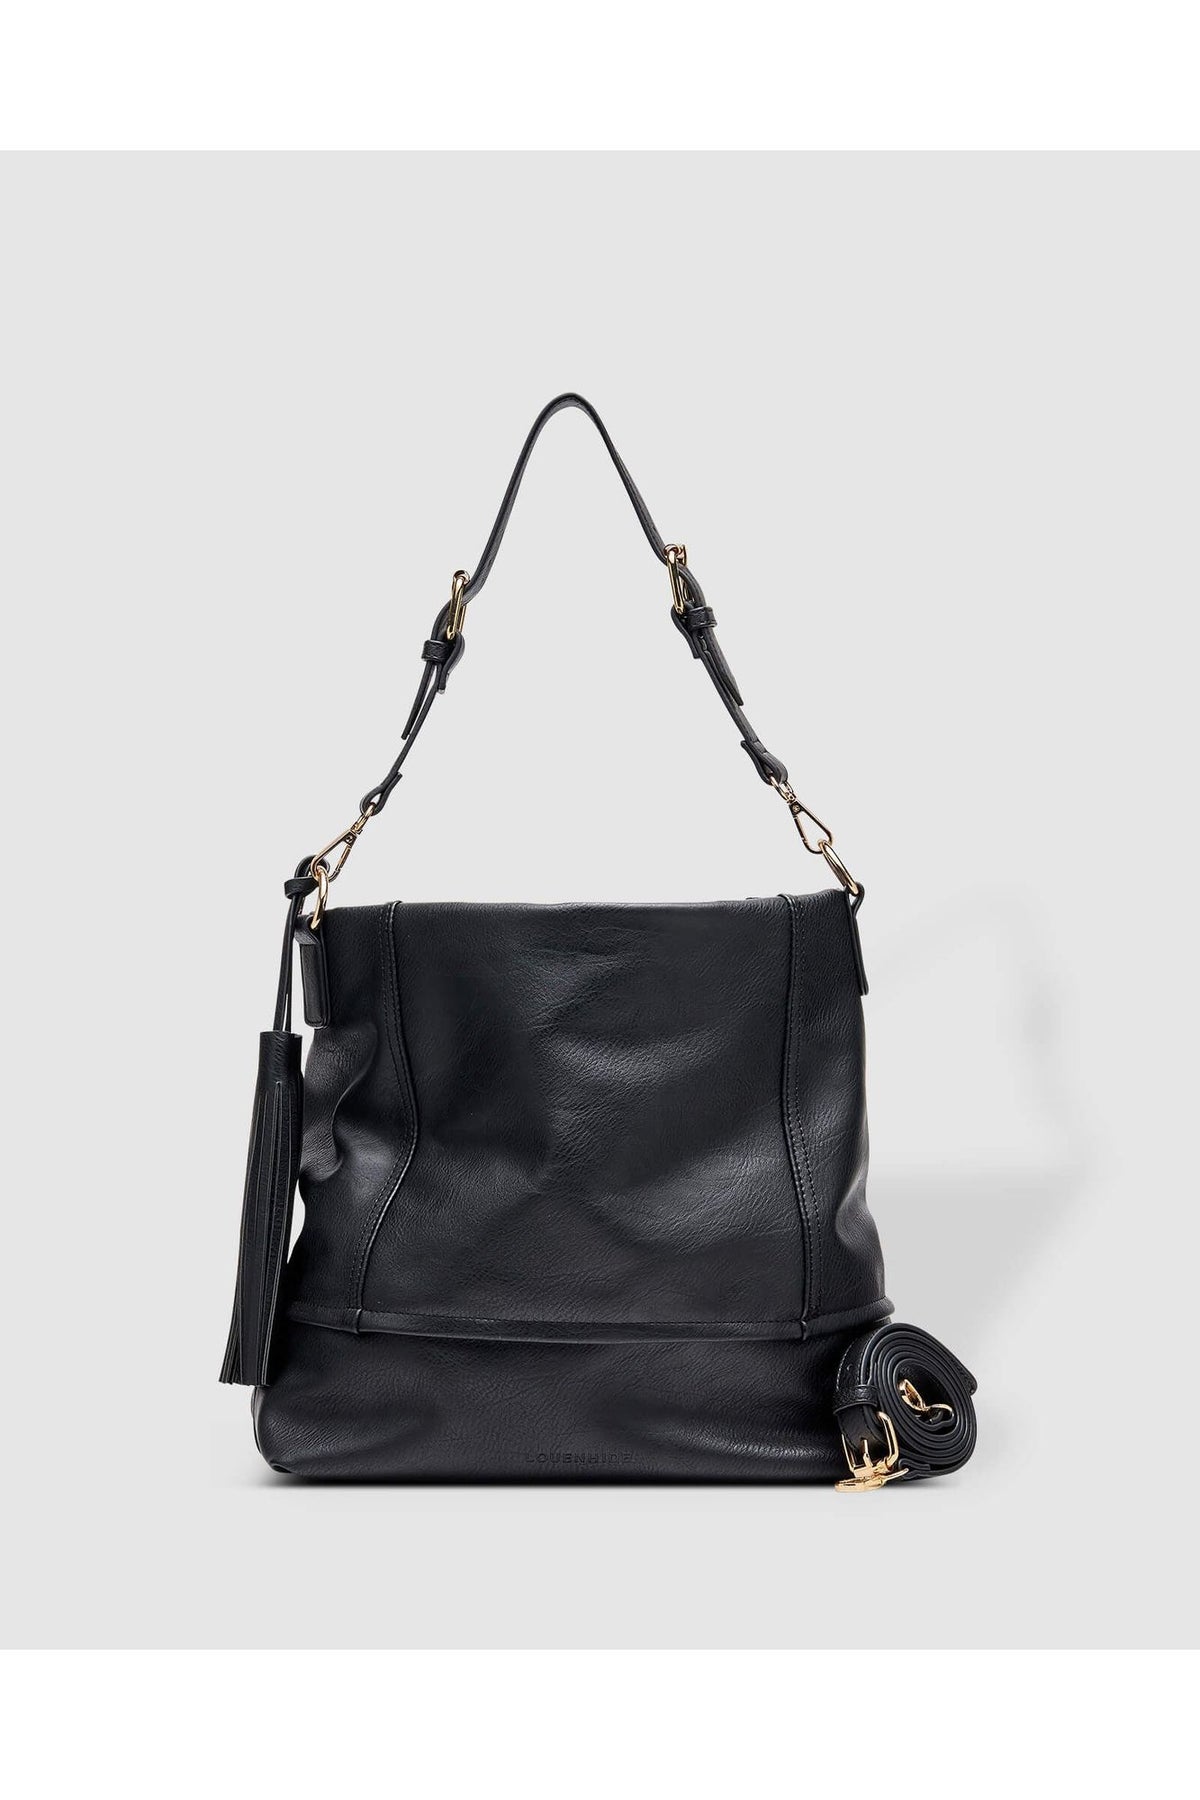 Louenhide Miley Bag - Style 2112, front with extra strap, black